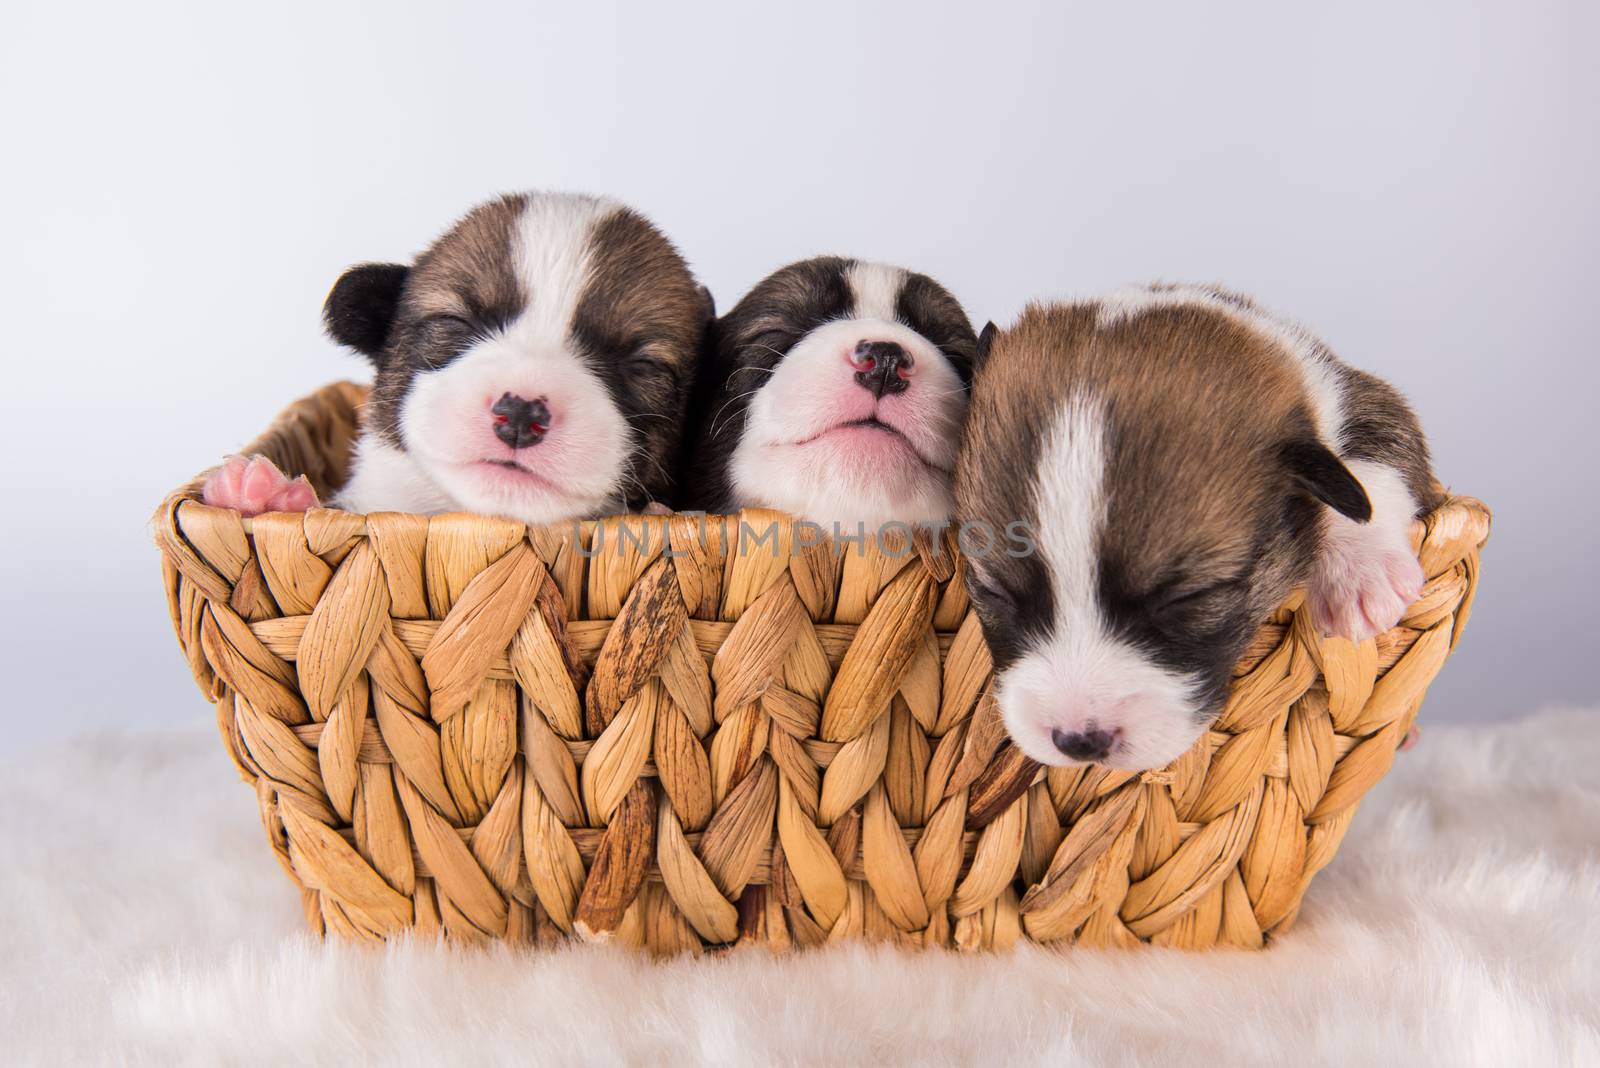 Group of three Pembroke Welsh Corgi pembroke puppies dogs on basket isolated on white background